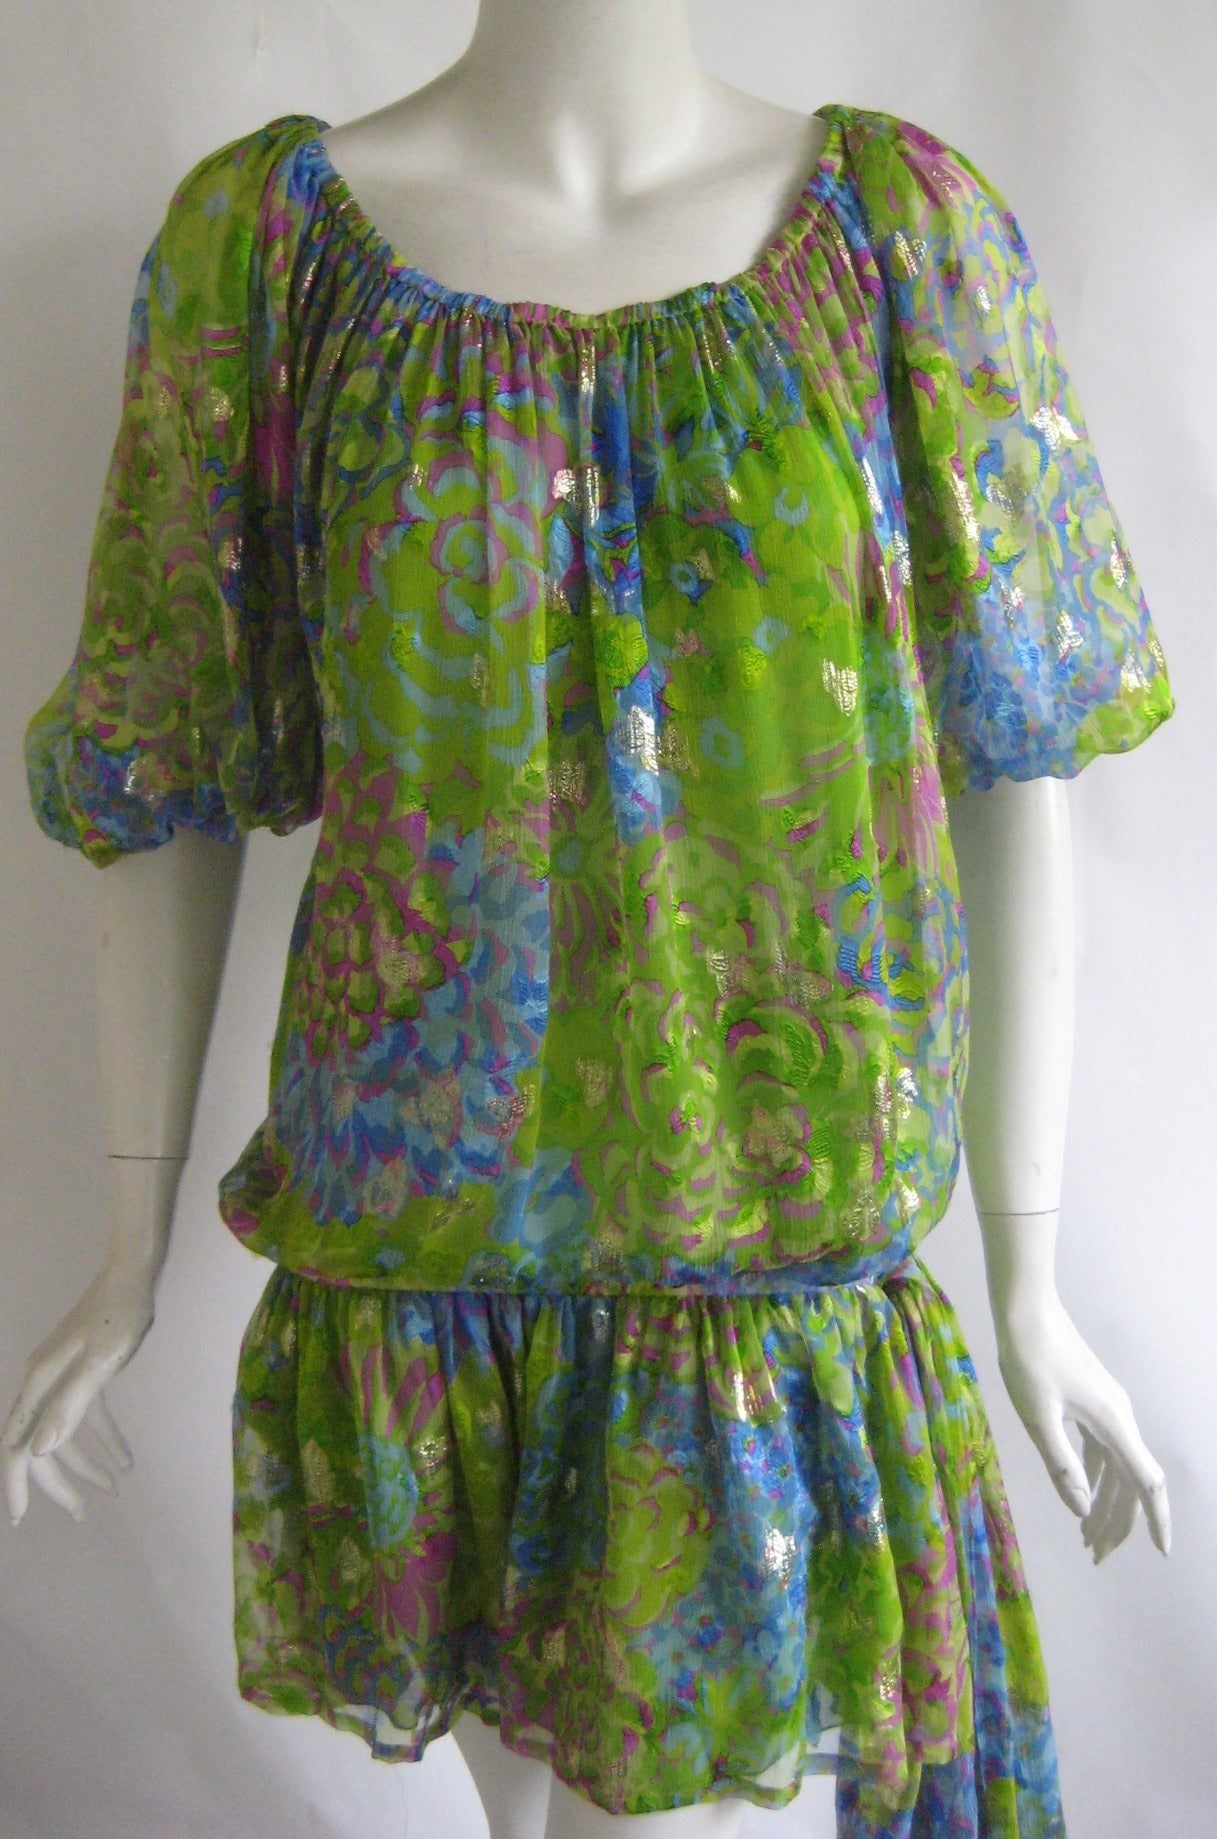 Yves Saint Laurent peasant dress of metallic silk chiffon .Completely lined in green silk chiffon.Elastic at neckline and hips .Chiffon swag to one side can be tired in a bow. 80% silk 20% metallic.
Size 38.